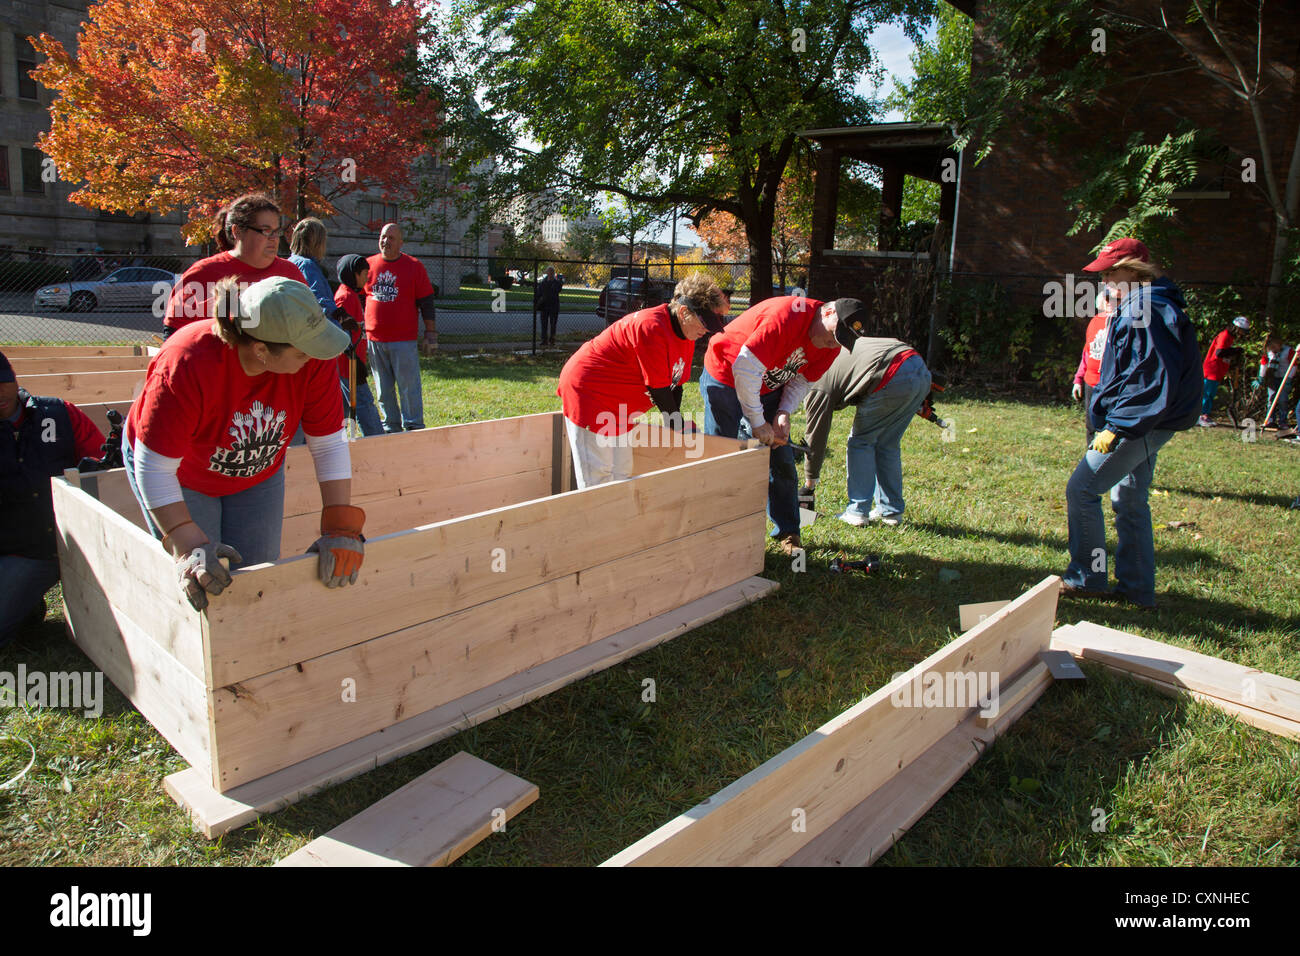 Detroit, Michigan - Volunteers from the United Methodist Church build planting boxes for a community garden. Stock Photo